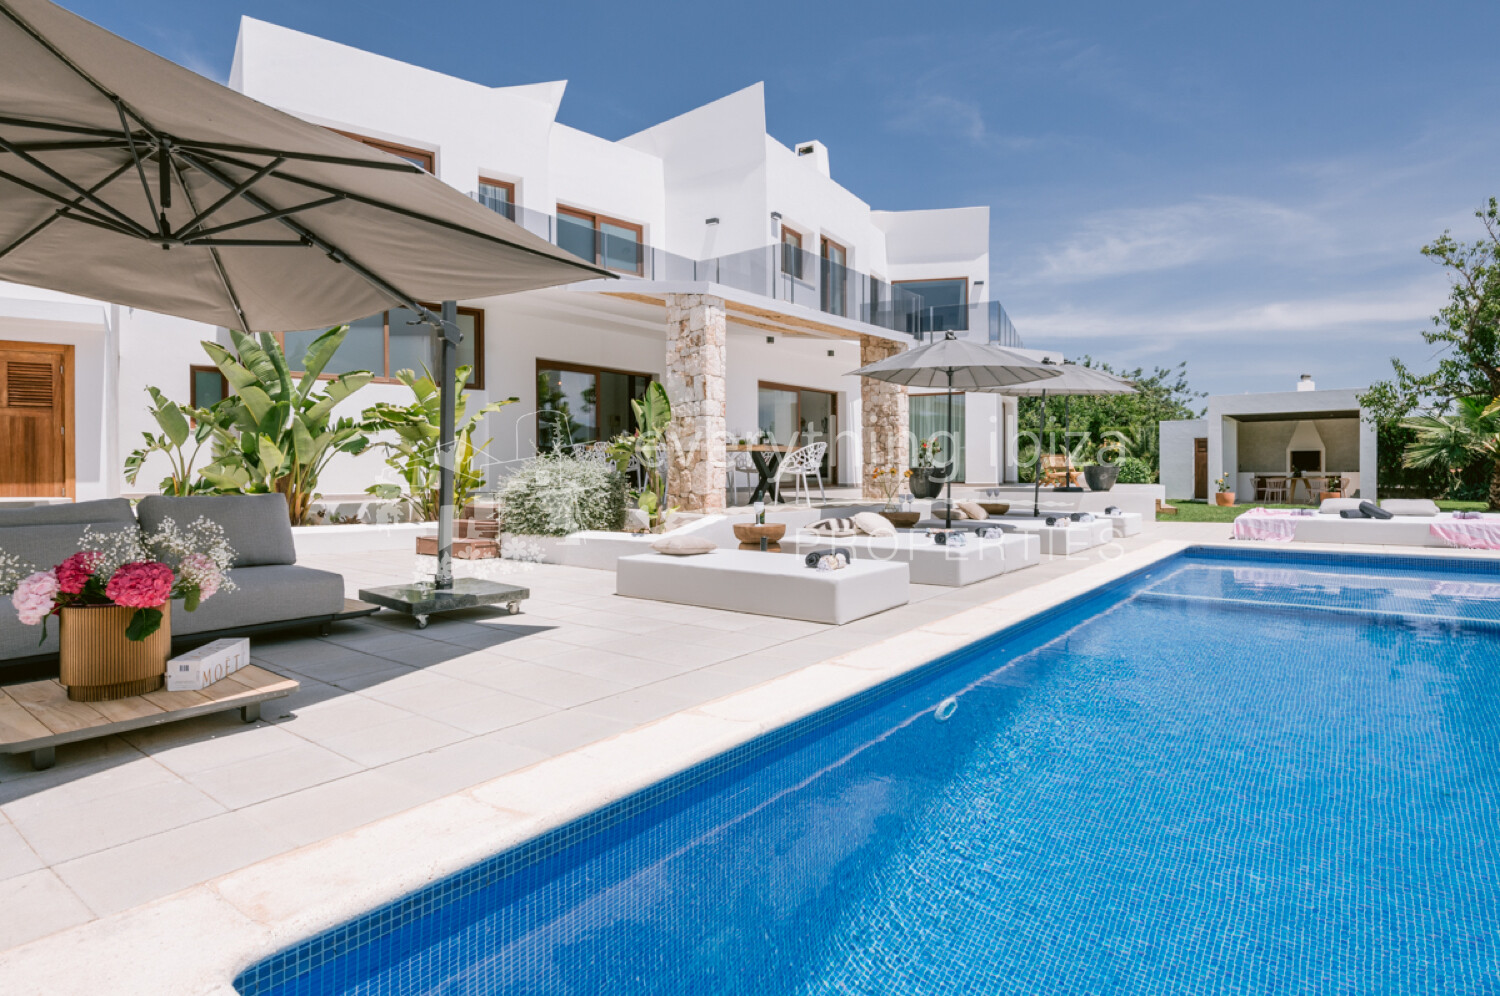 Modern Luxurious Detached Villa with Private Pool and Beautiful Garden, ref. 1720, for sale in Ibiza by everything ibiza Properties